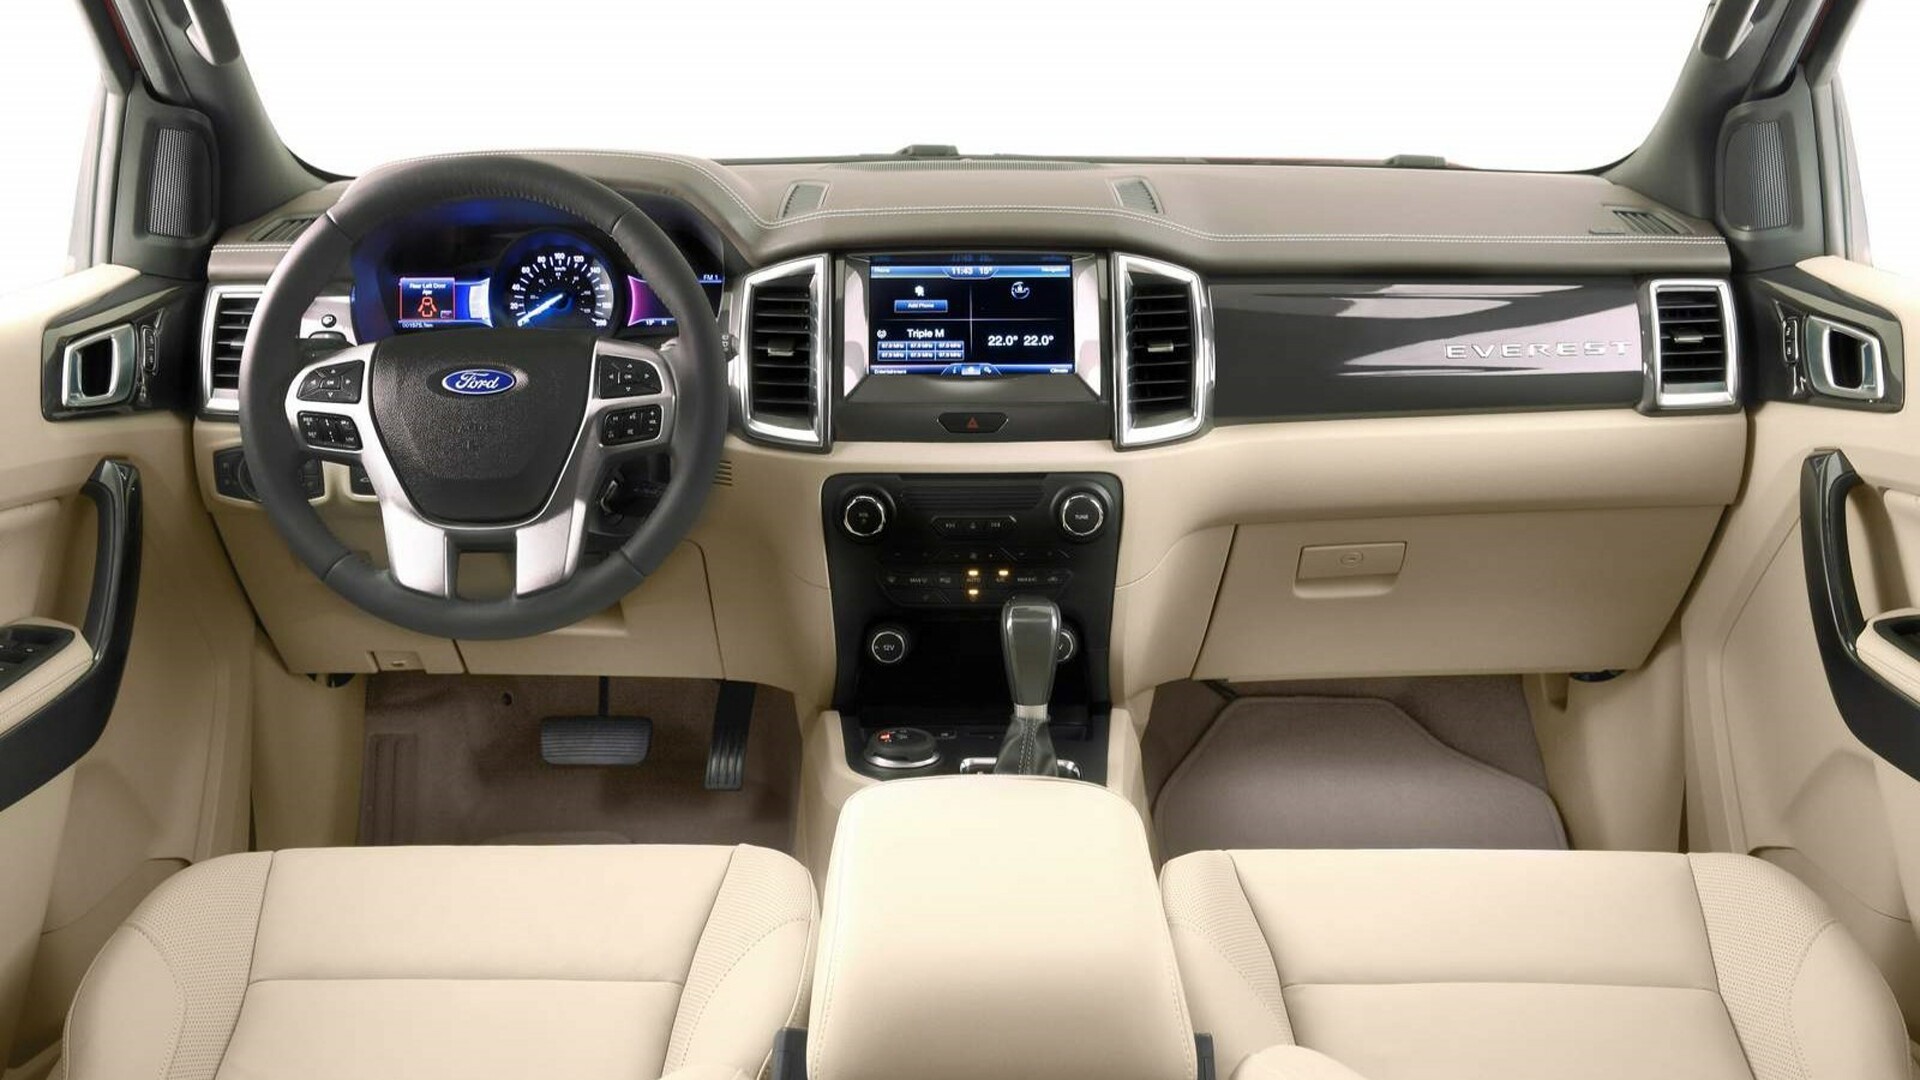 The Interior, Steering, Dashboard, And Central Console Of A Ford Everest